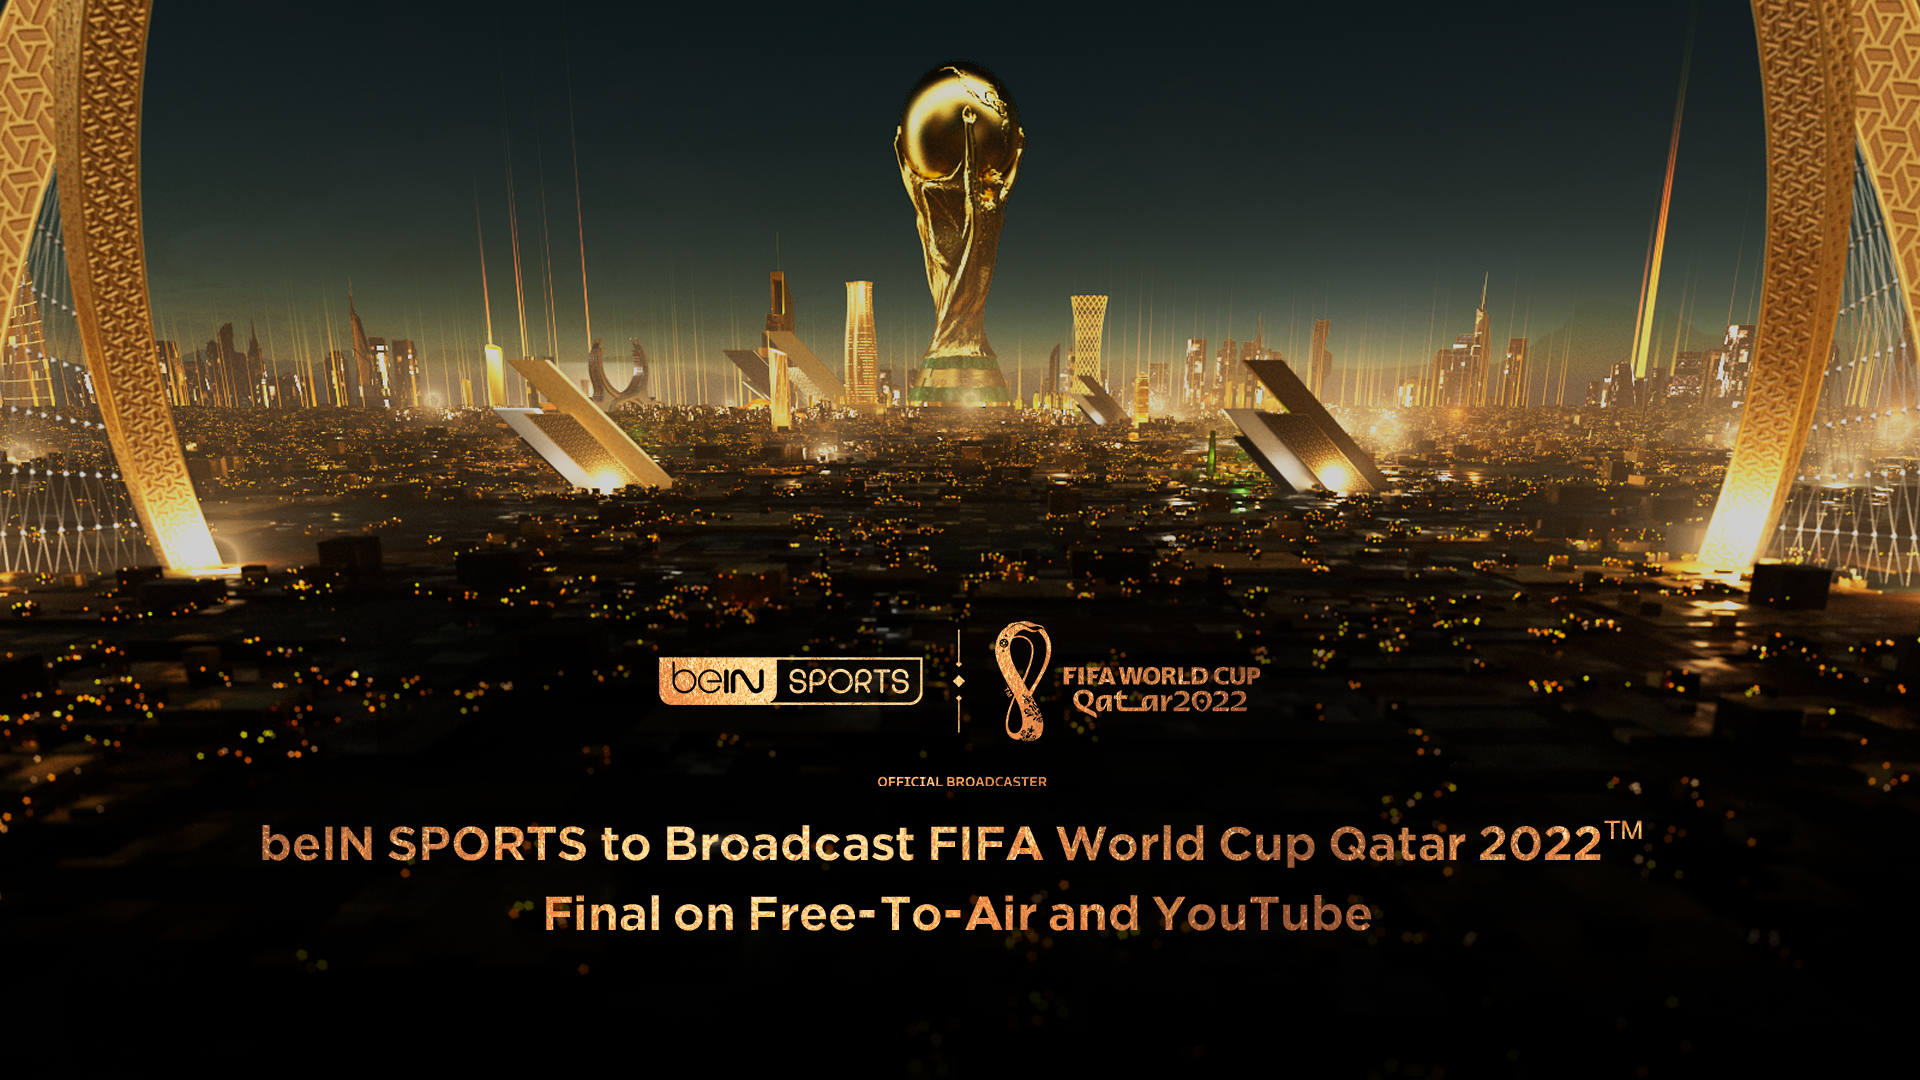 beIN SPORTS to Broadcast FIFA World Cup Qatar 2022™ Final on Free-To-Air and YouTube